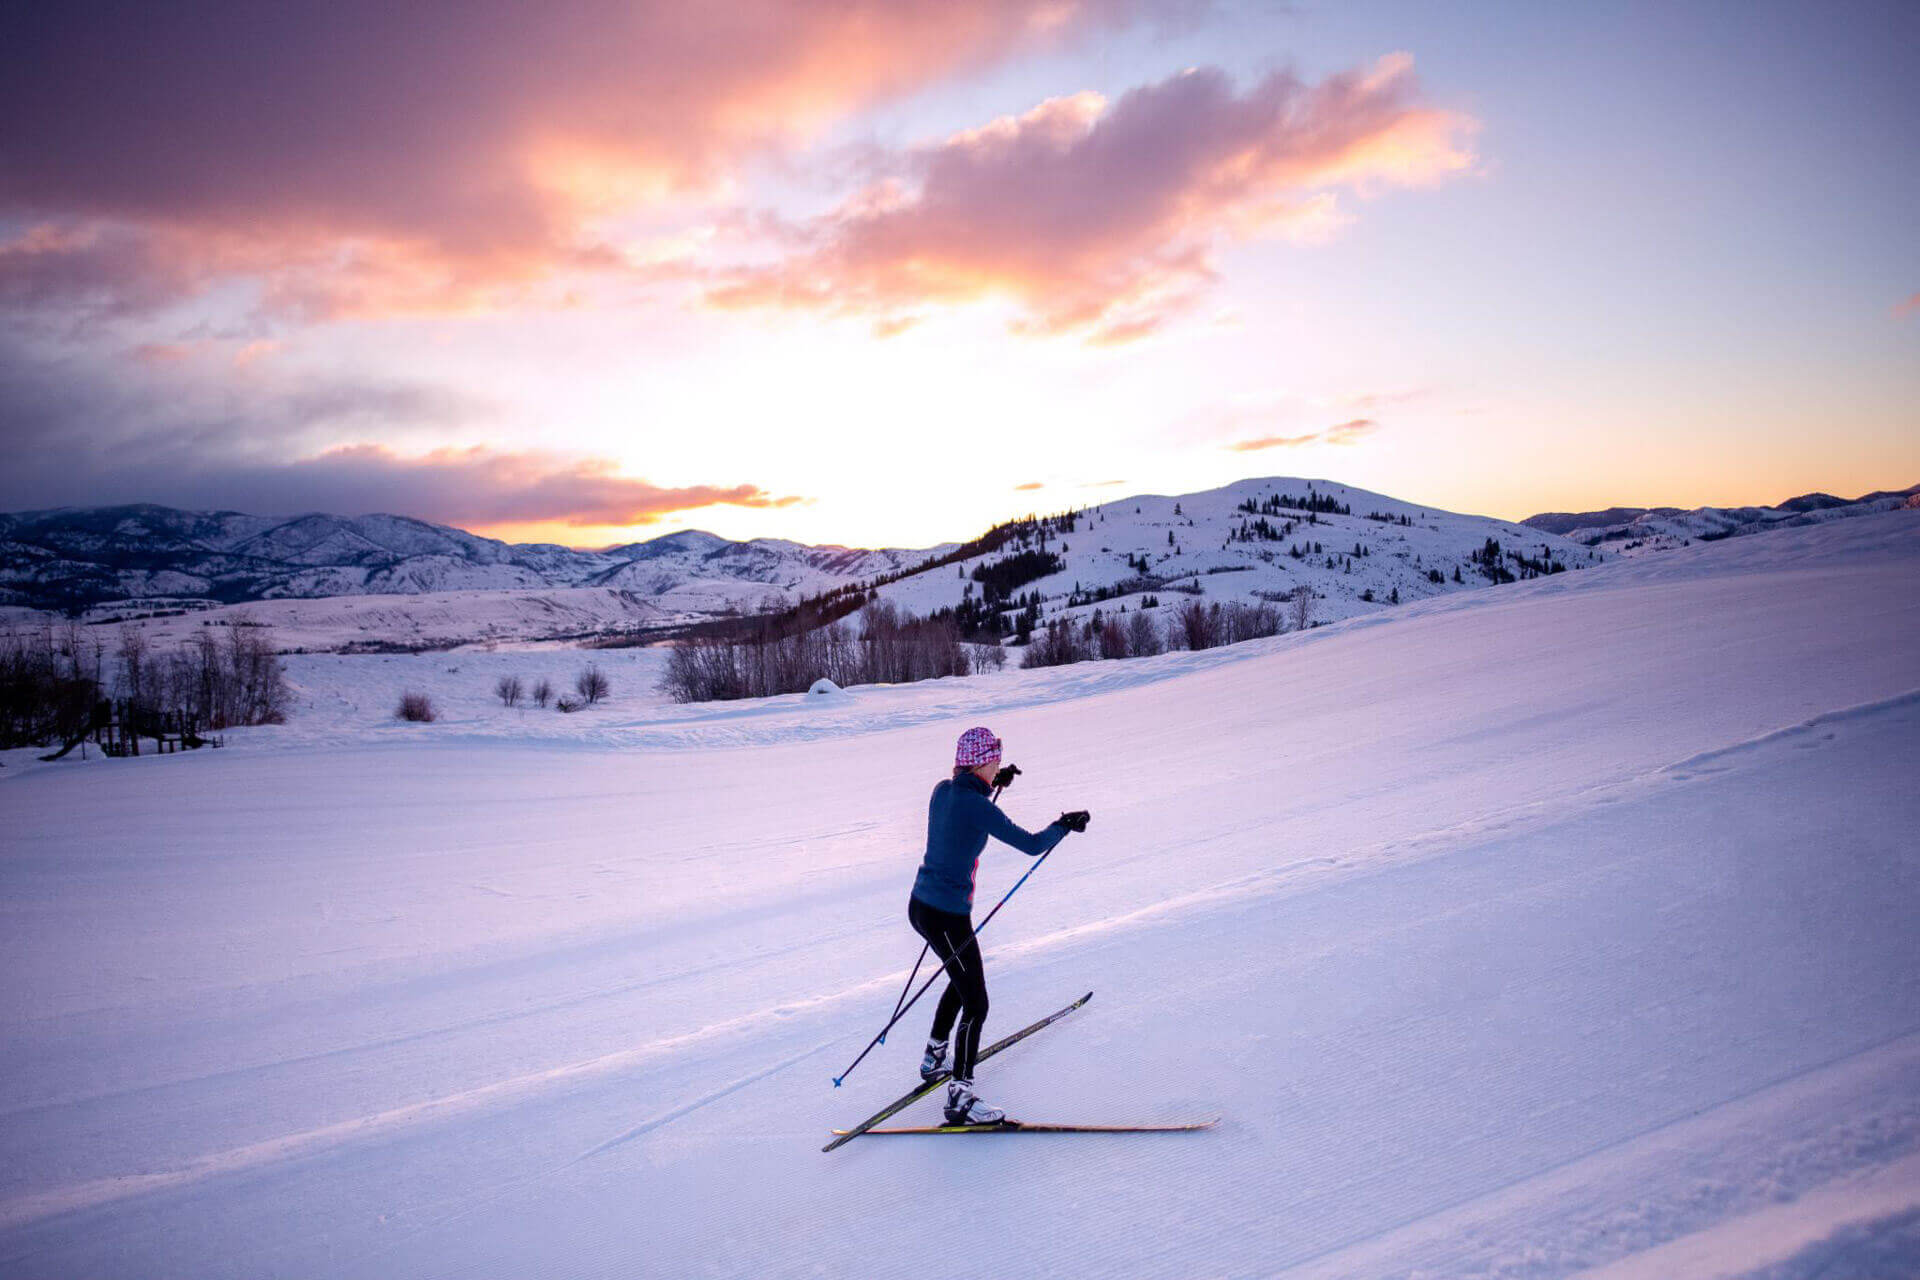 A woman enjoys cross-country skiiing at sunset in central Washington